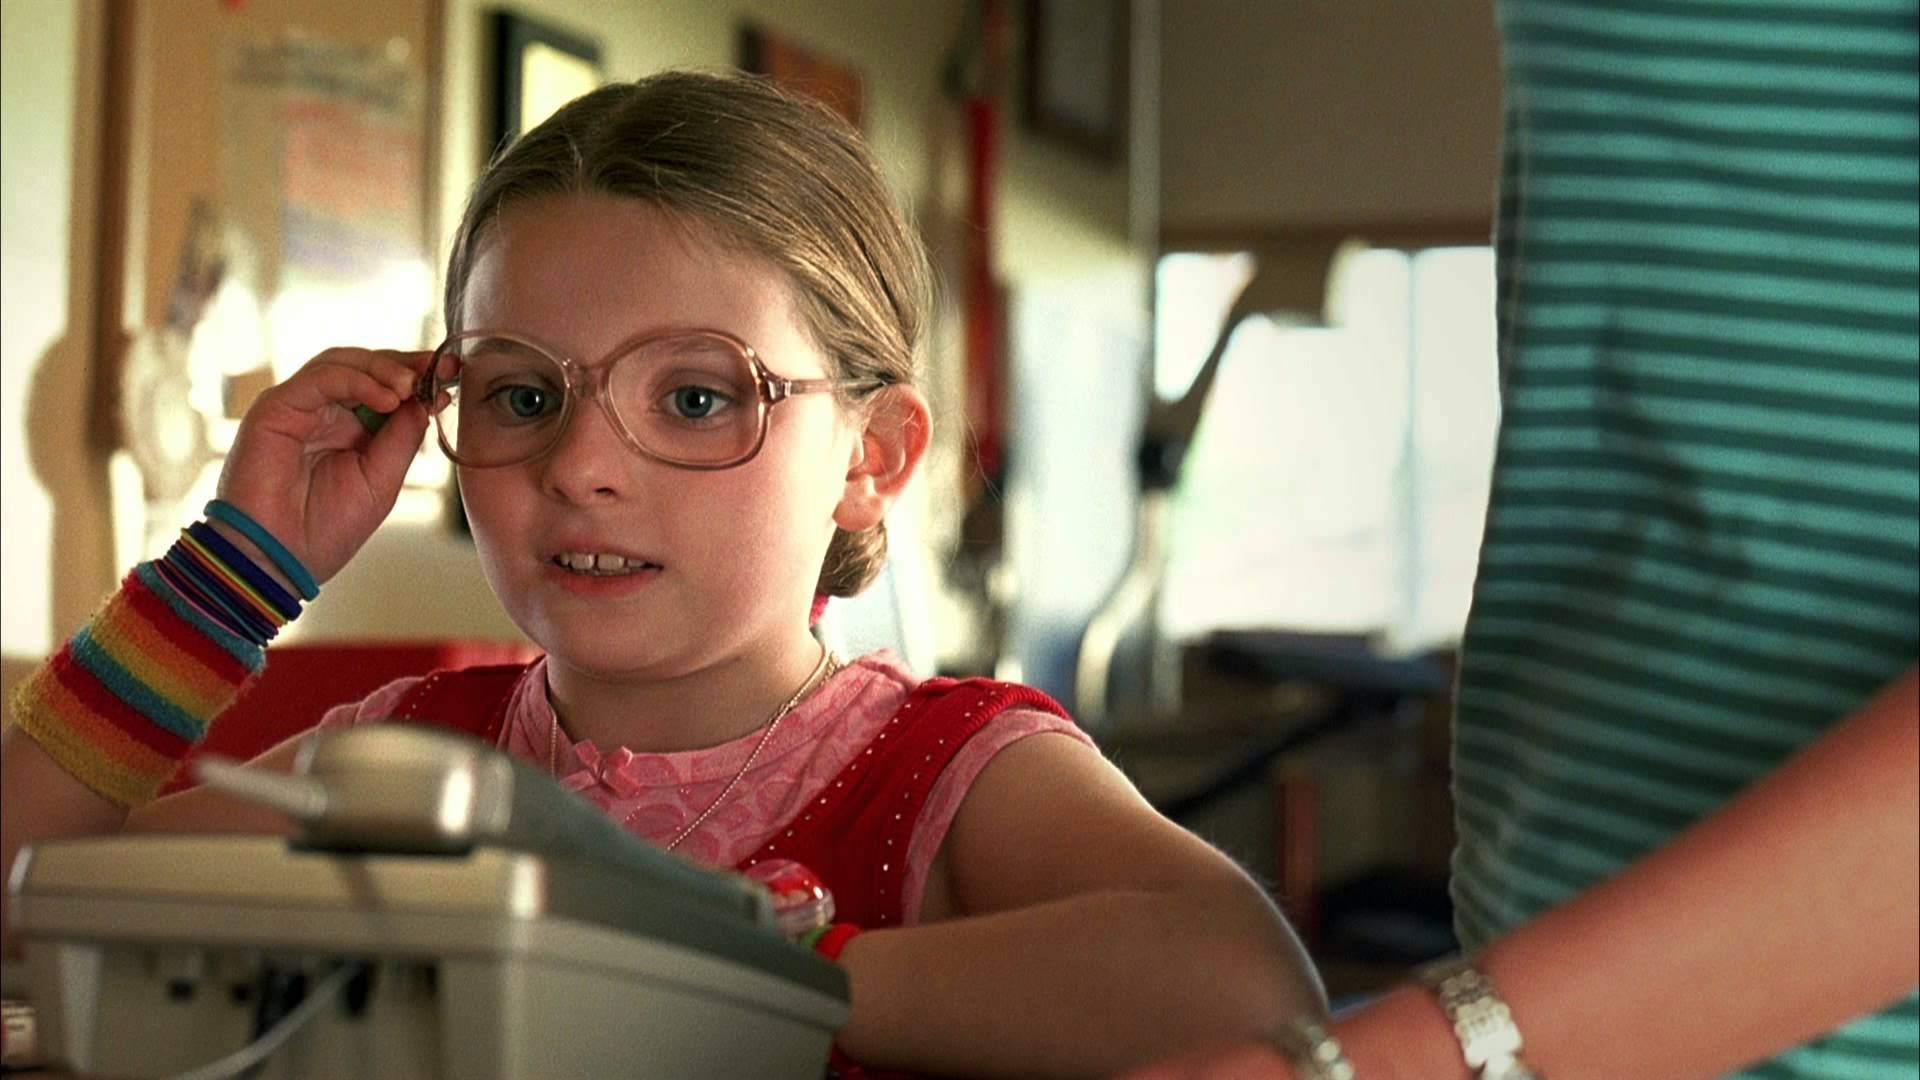 Little Miss Sunshine: Abigail Breslin as Olive Hoover, The young daughter. 1920x1080 Full HD Wallpaper.